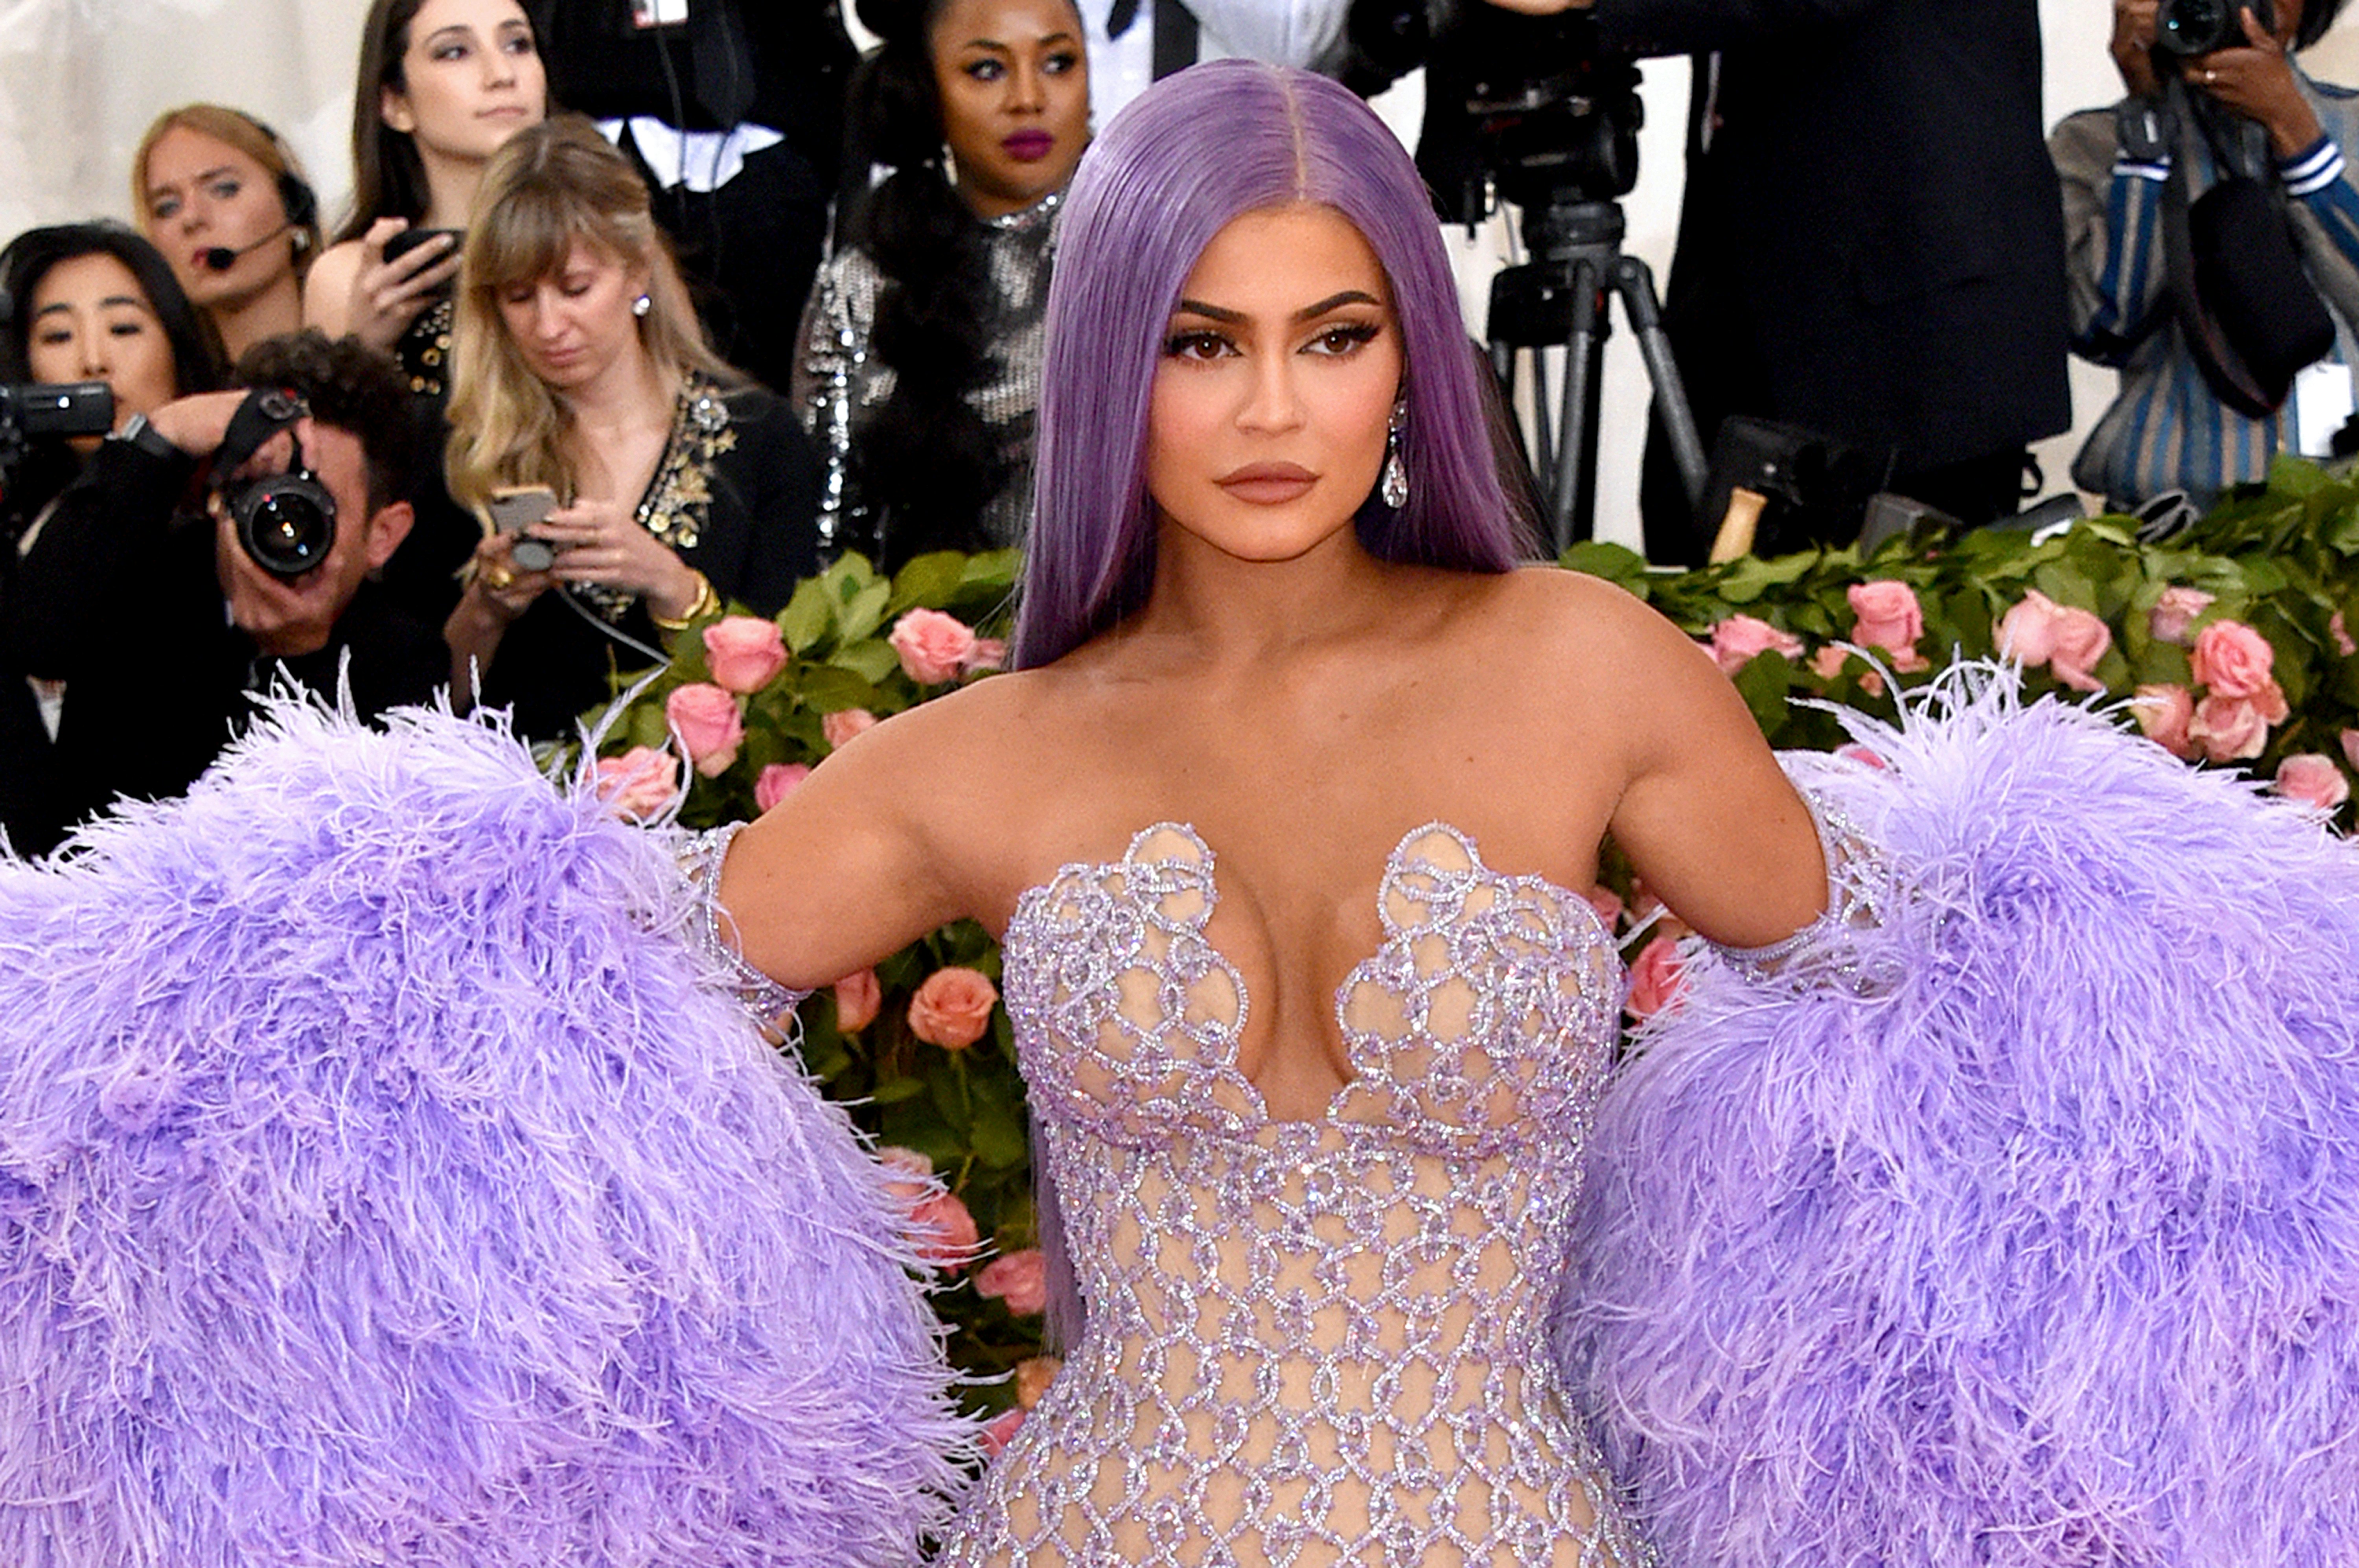 Costume Is Kylie Jenner 2018 Met Gala Dress Ripped Kylie Jenner at the 2017...